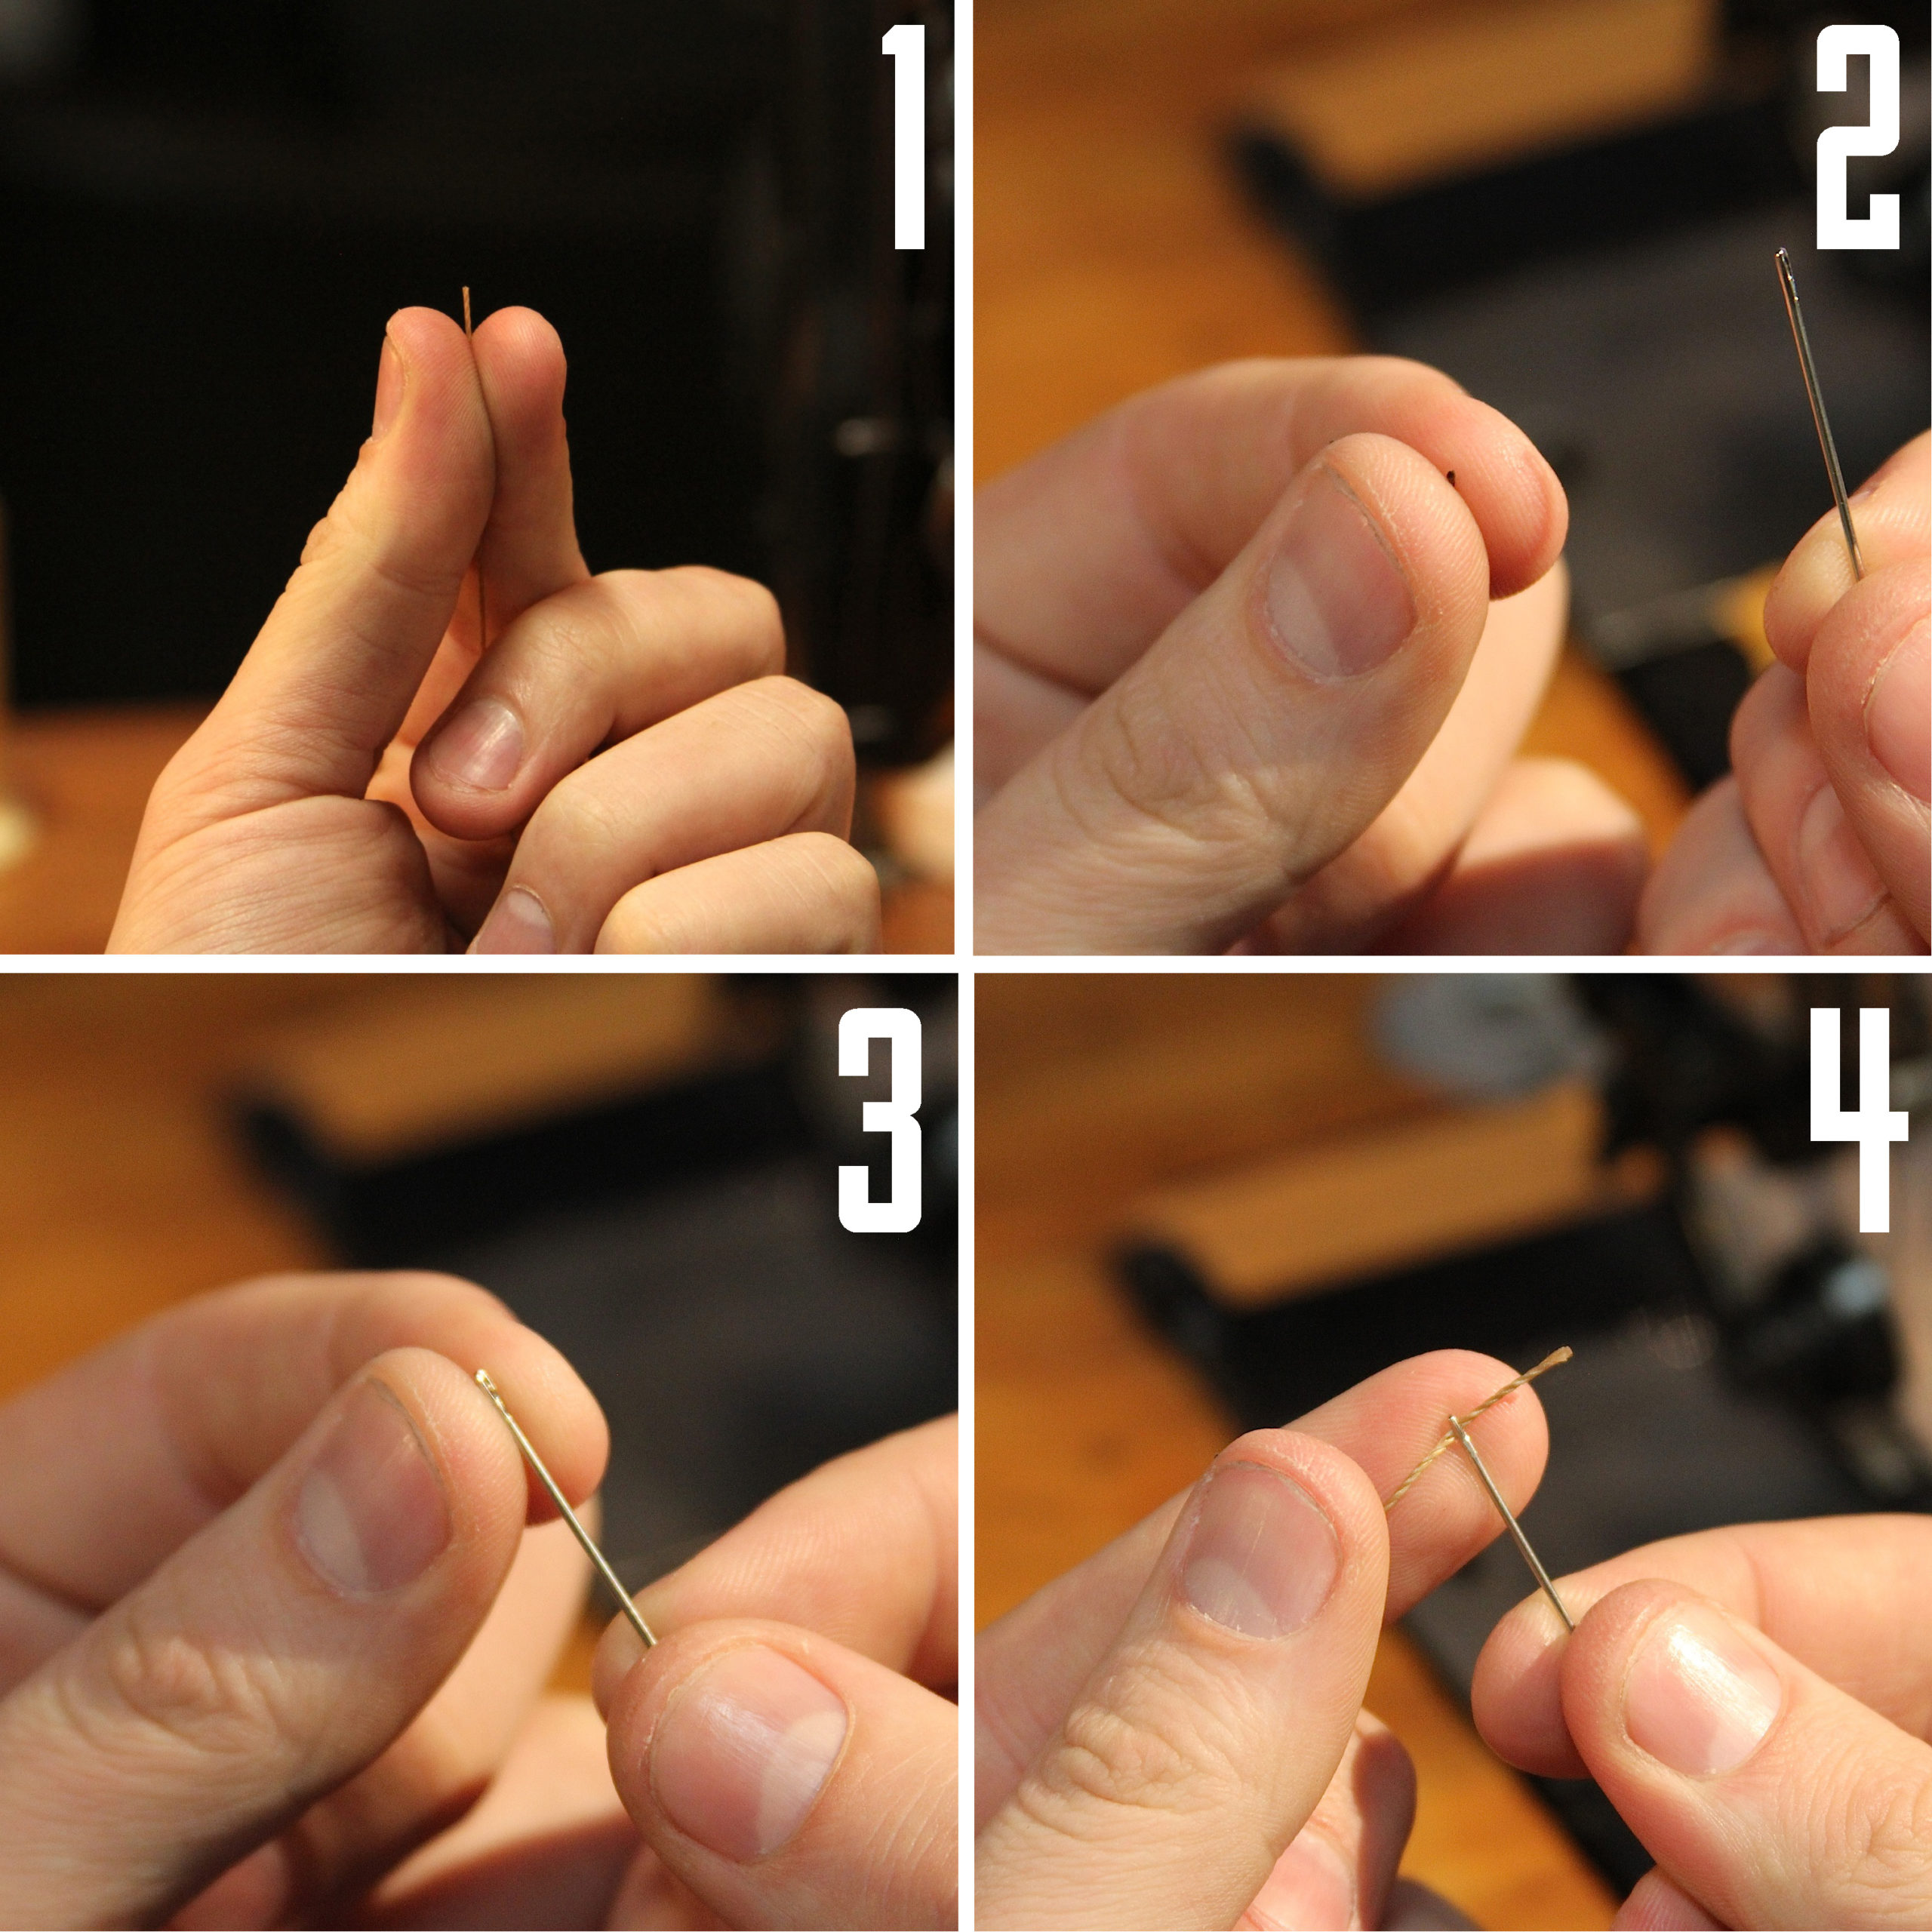 Thread Needles Faster By Moving The Needle, Not The Thread